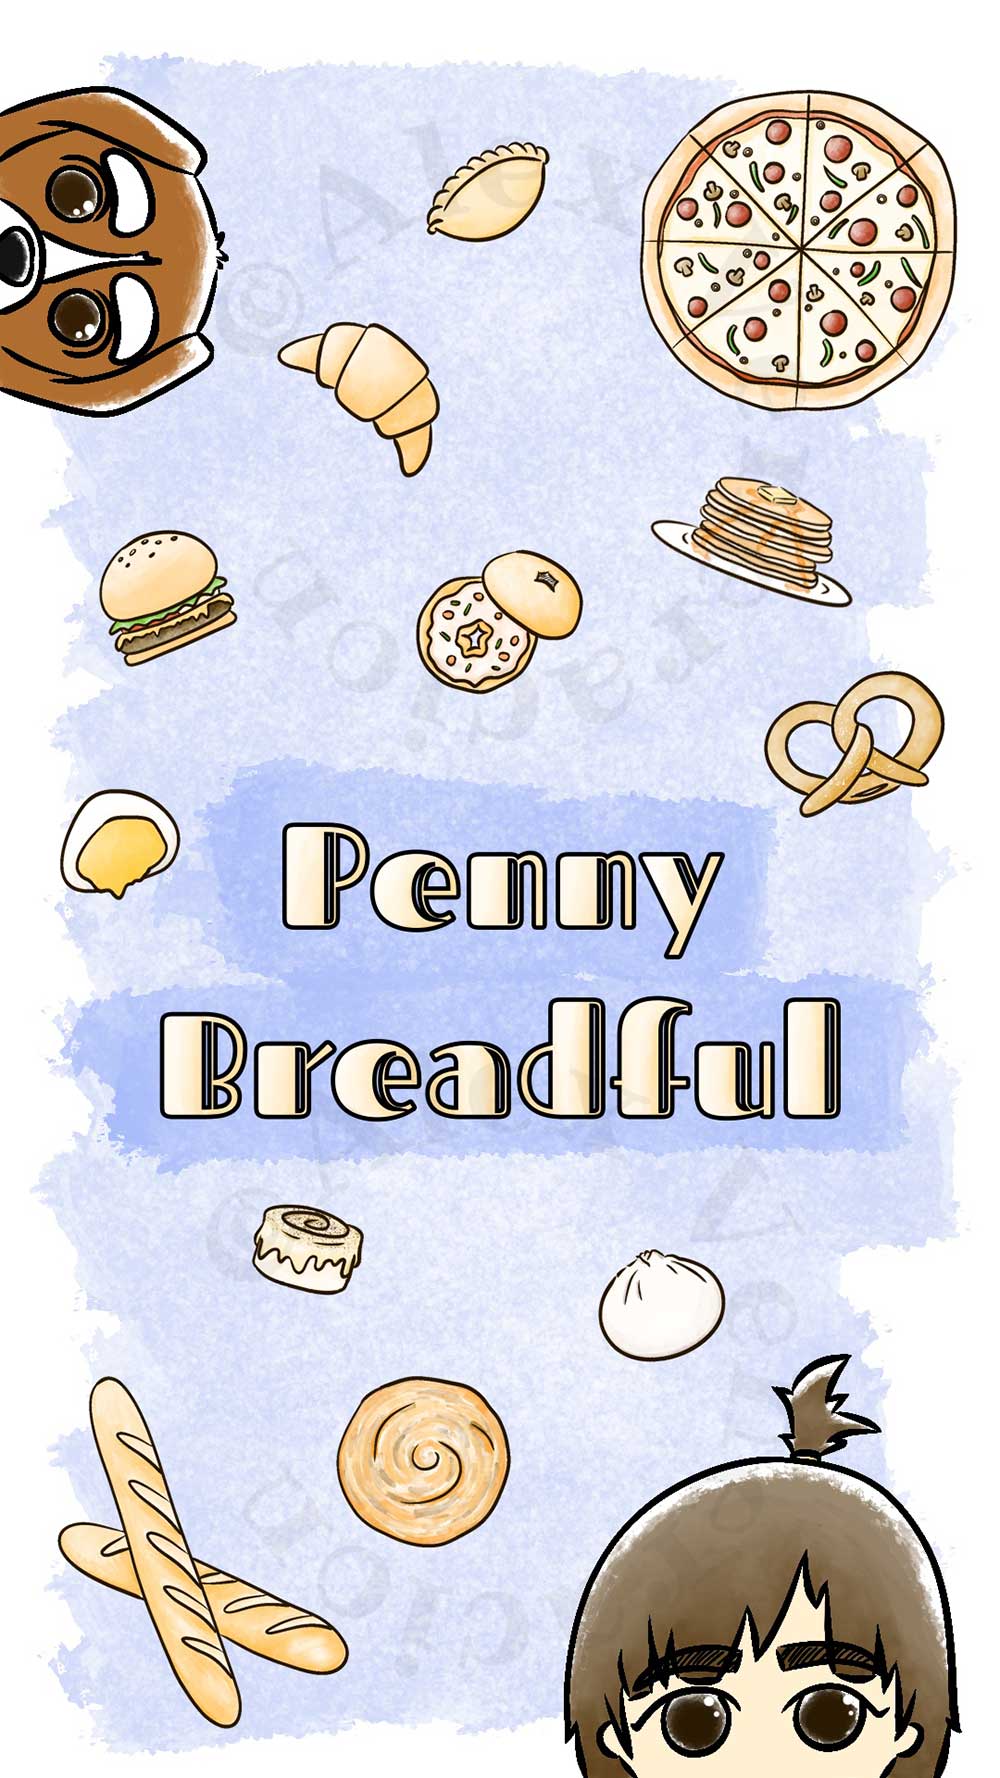 Pennybreadfulcover